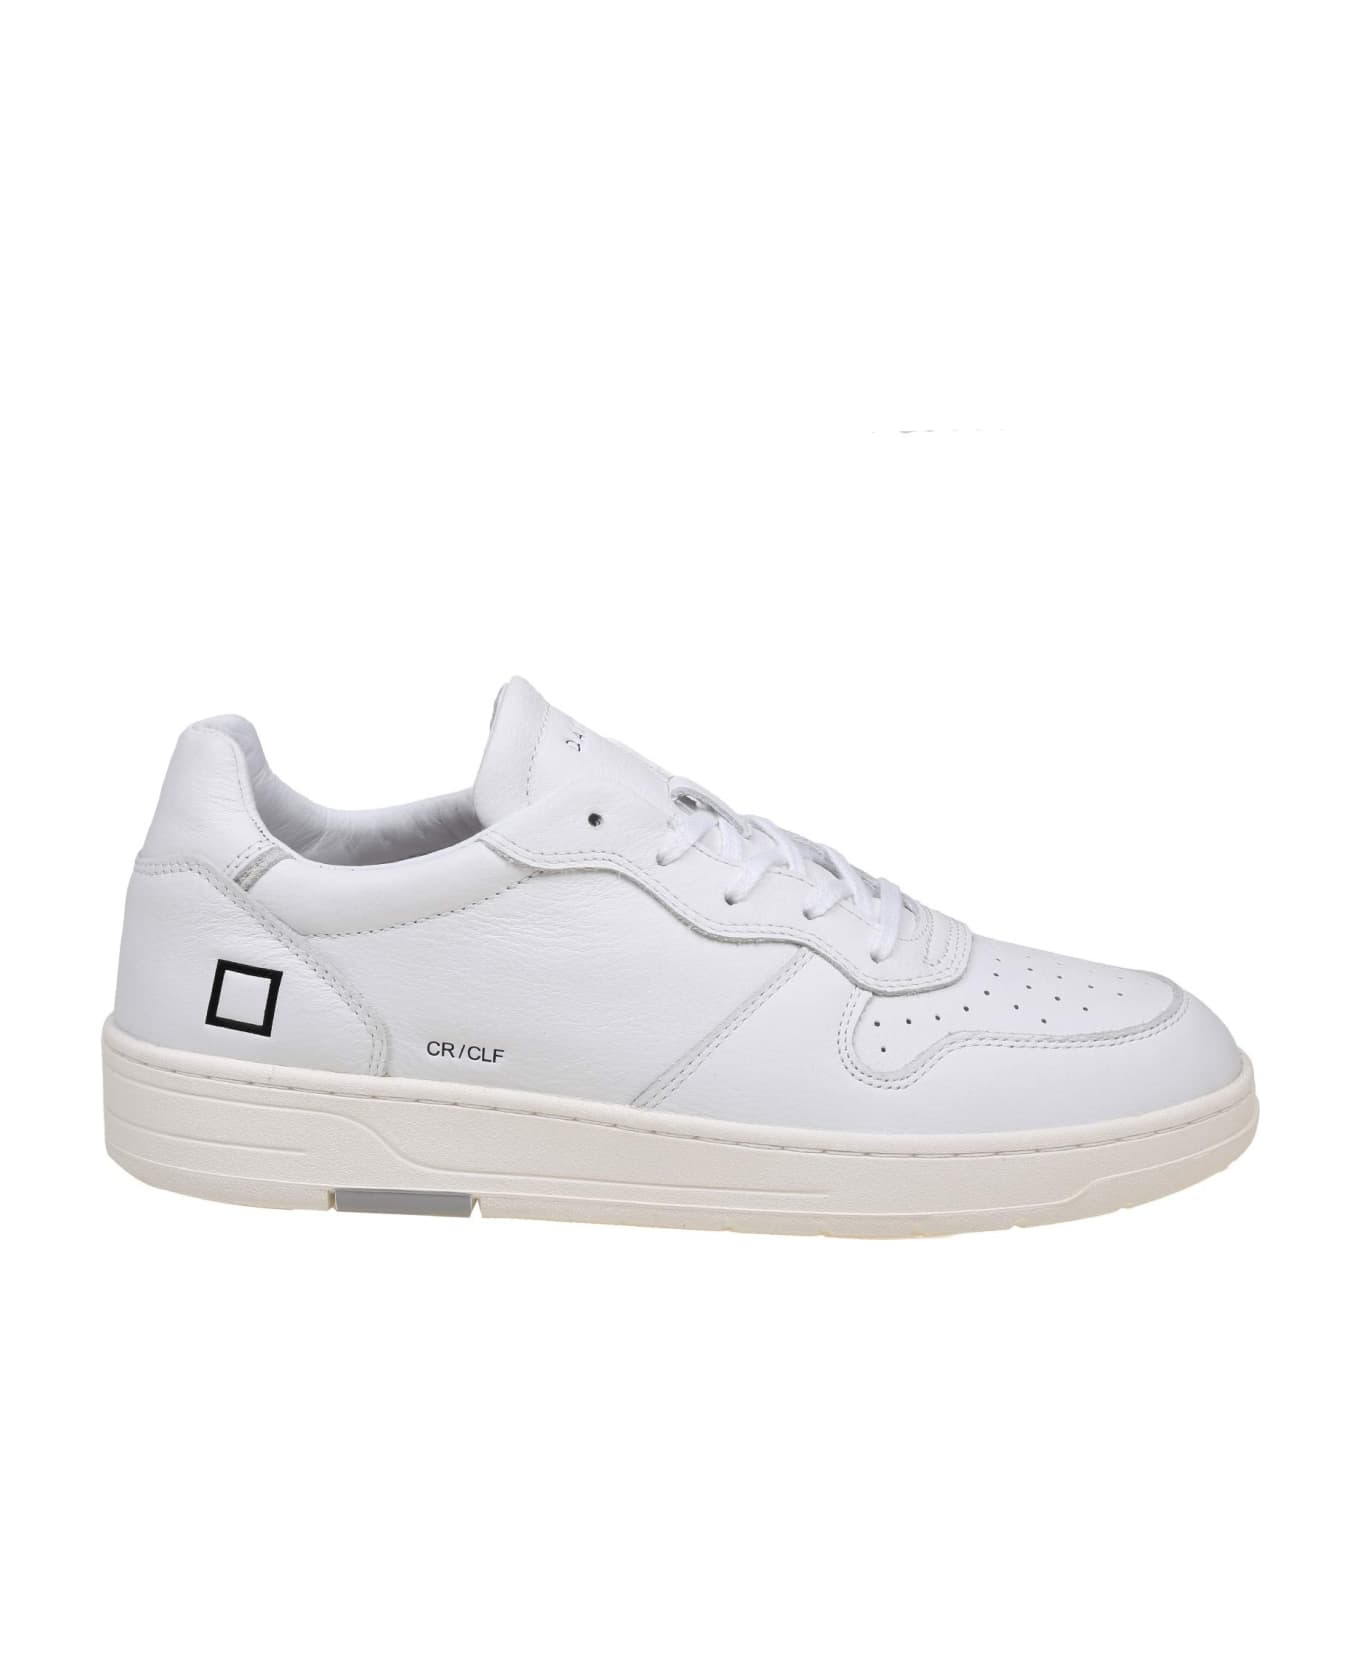 D.A.T.E. Court Sneakers In White Leather - White